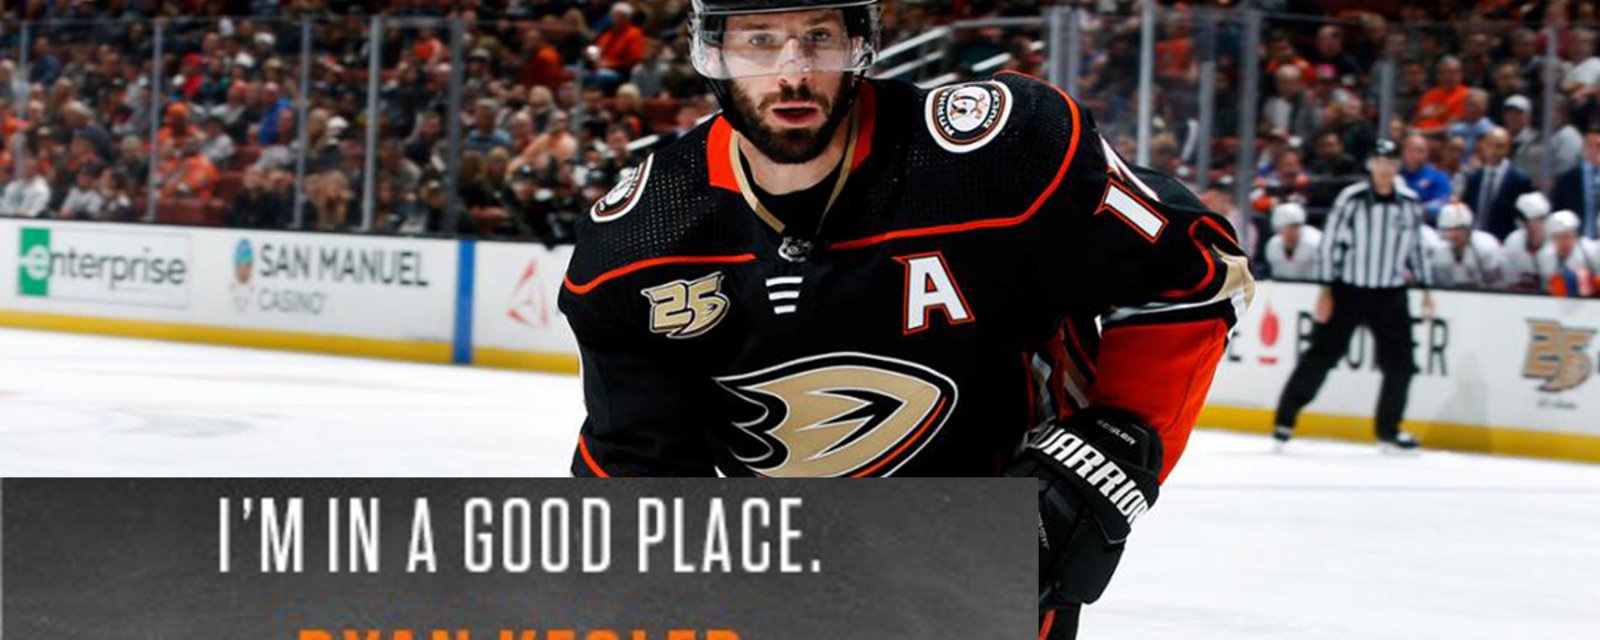 Report: Kesler releases a heart-wrenching statement